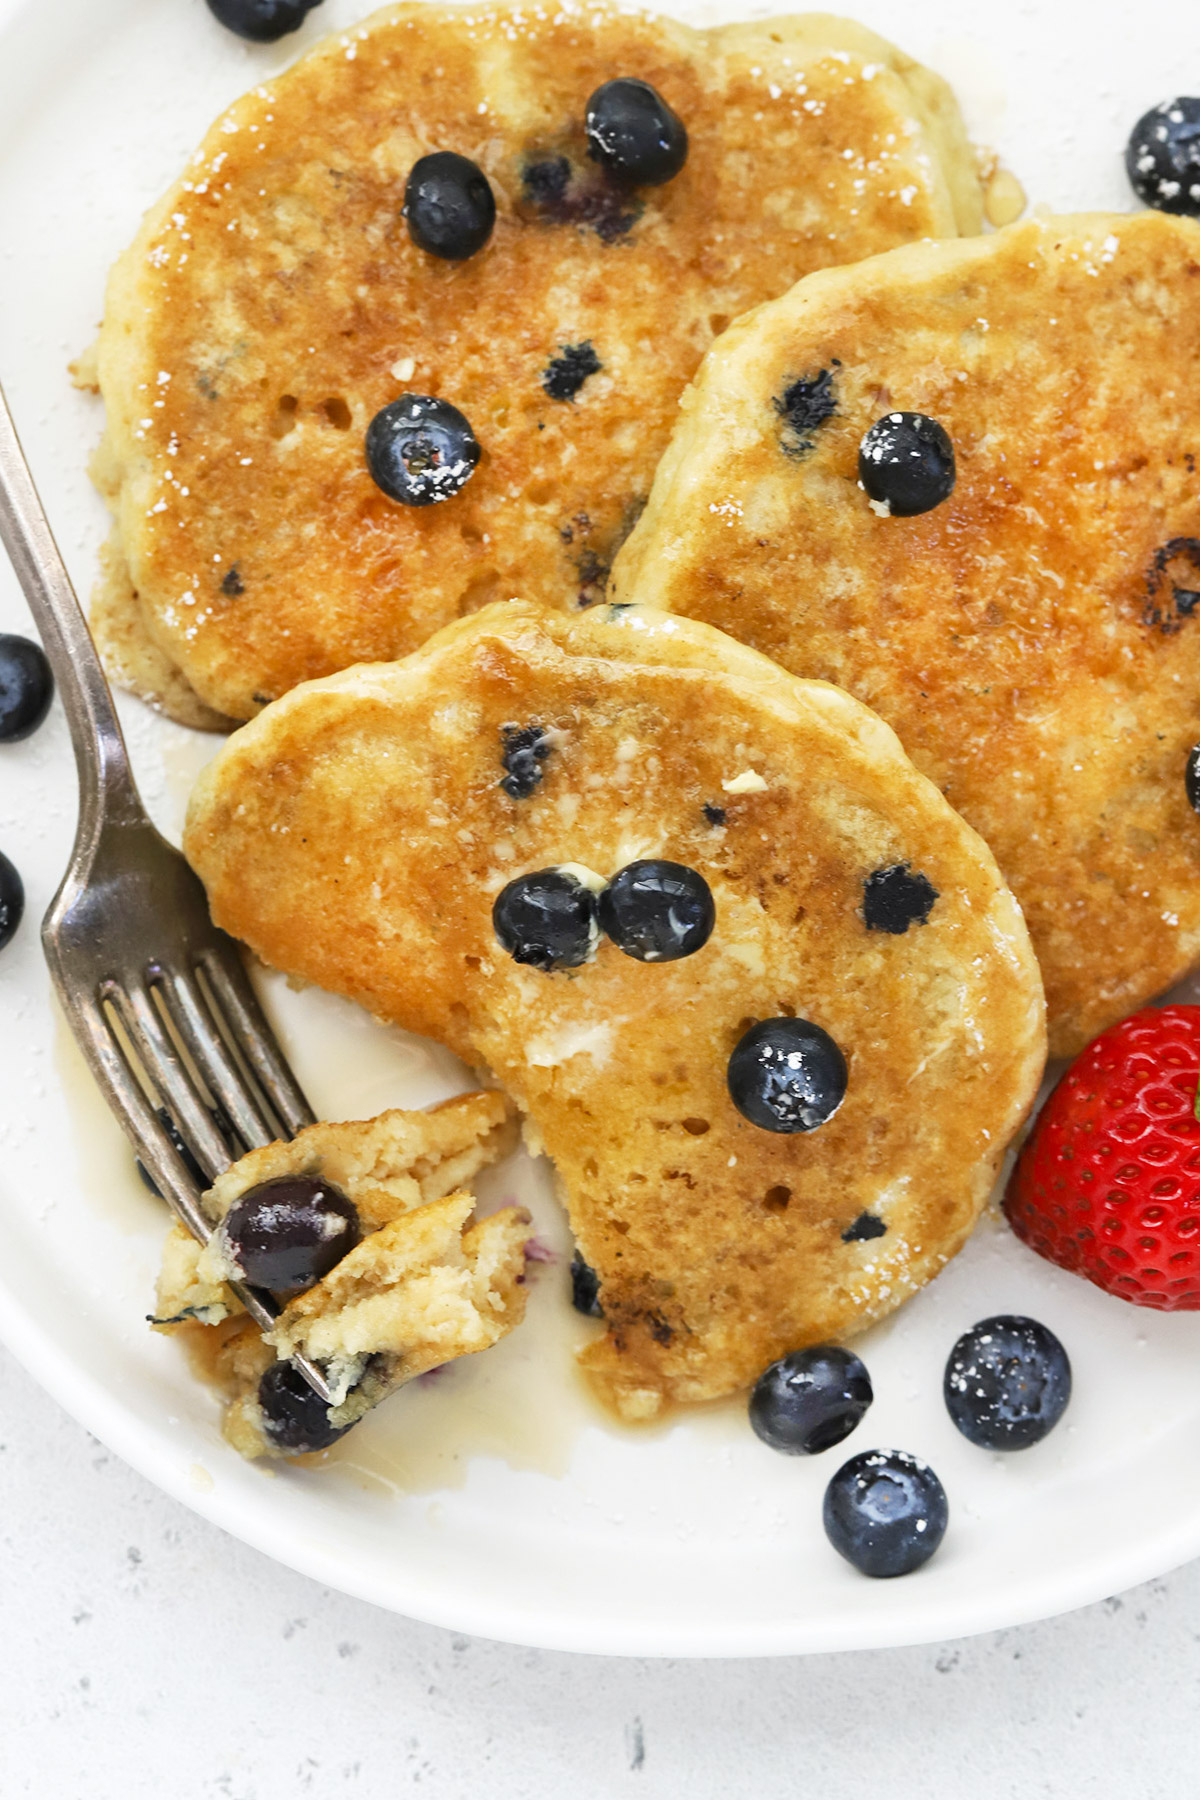 Close up view of 3 fluffy gluten-free blueberry pancakes on a white plate drizzled with syrup